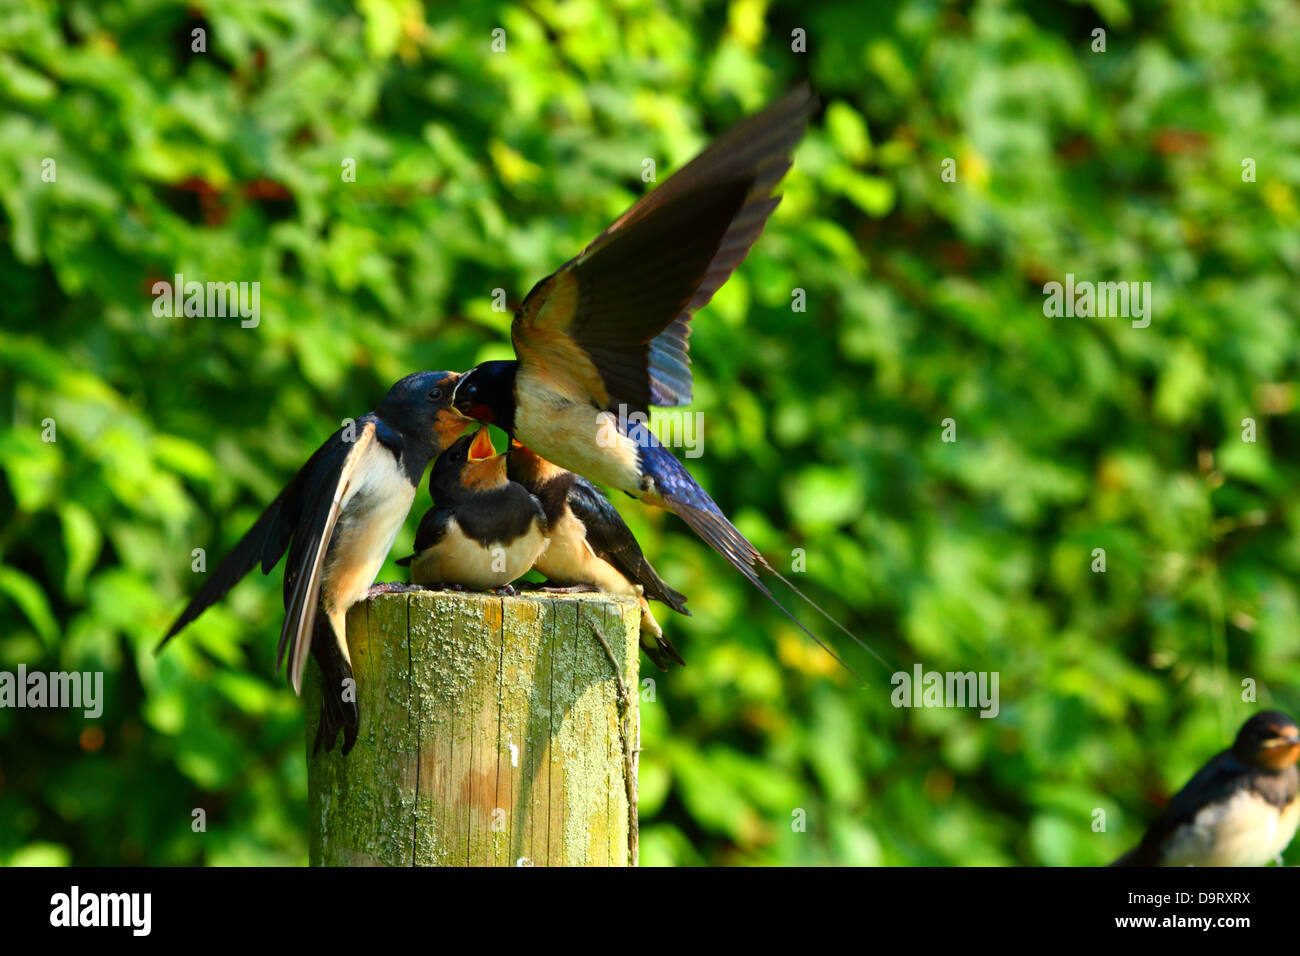 baby swallow being fed insects by adult swallow Stock Photo